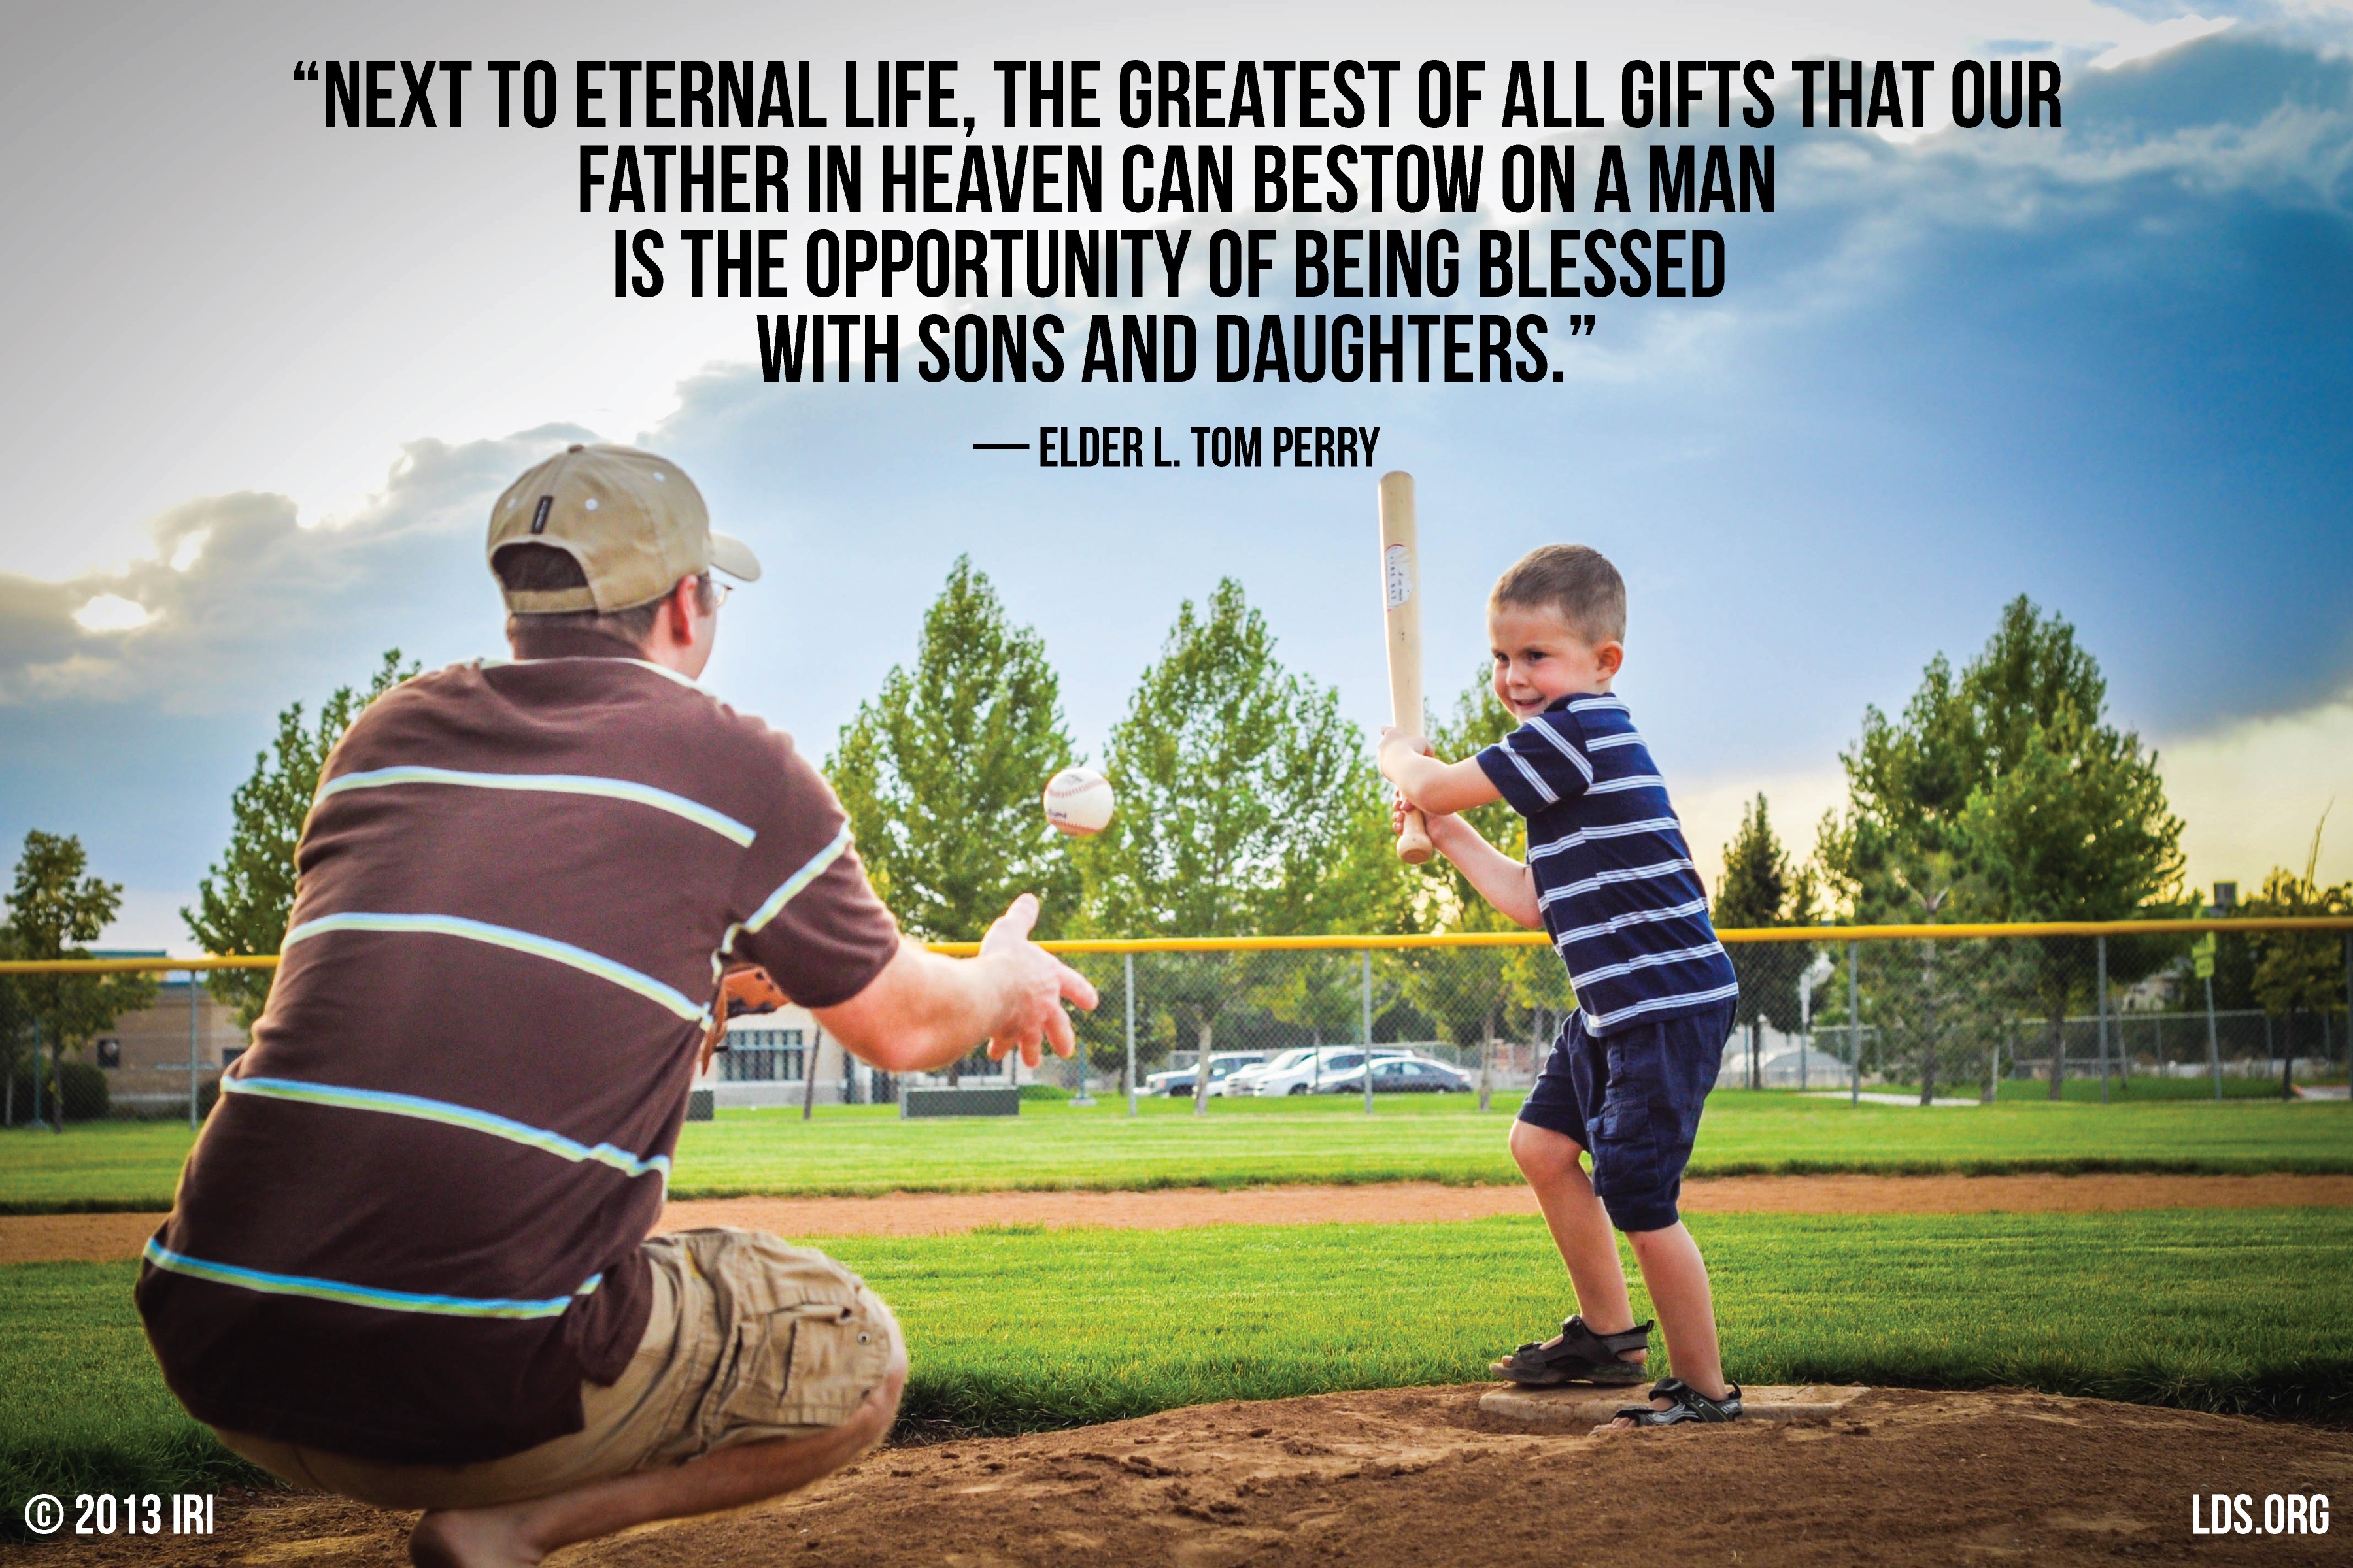 An image of a father and son playing baseball, coupled with a quote by Elder L. Tom Perry: “Next to eternal life, the greatest of all gifts that our Father in heaven can bestow … is … being blessed with sons and daughters.”